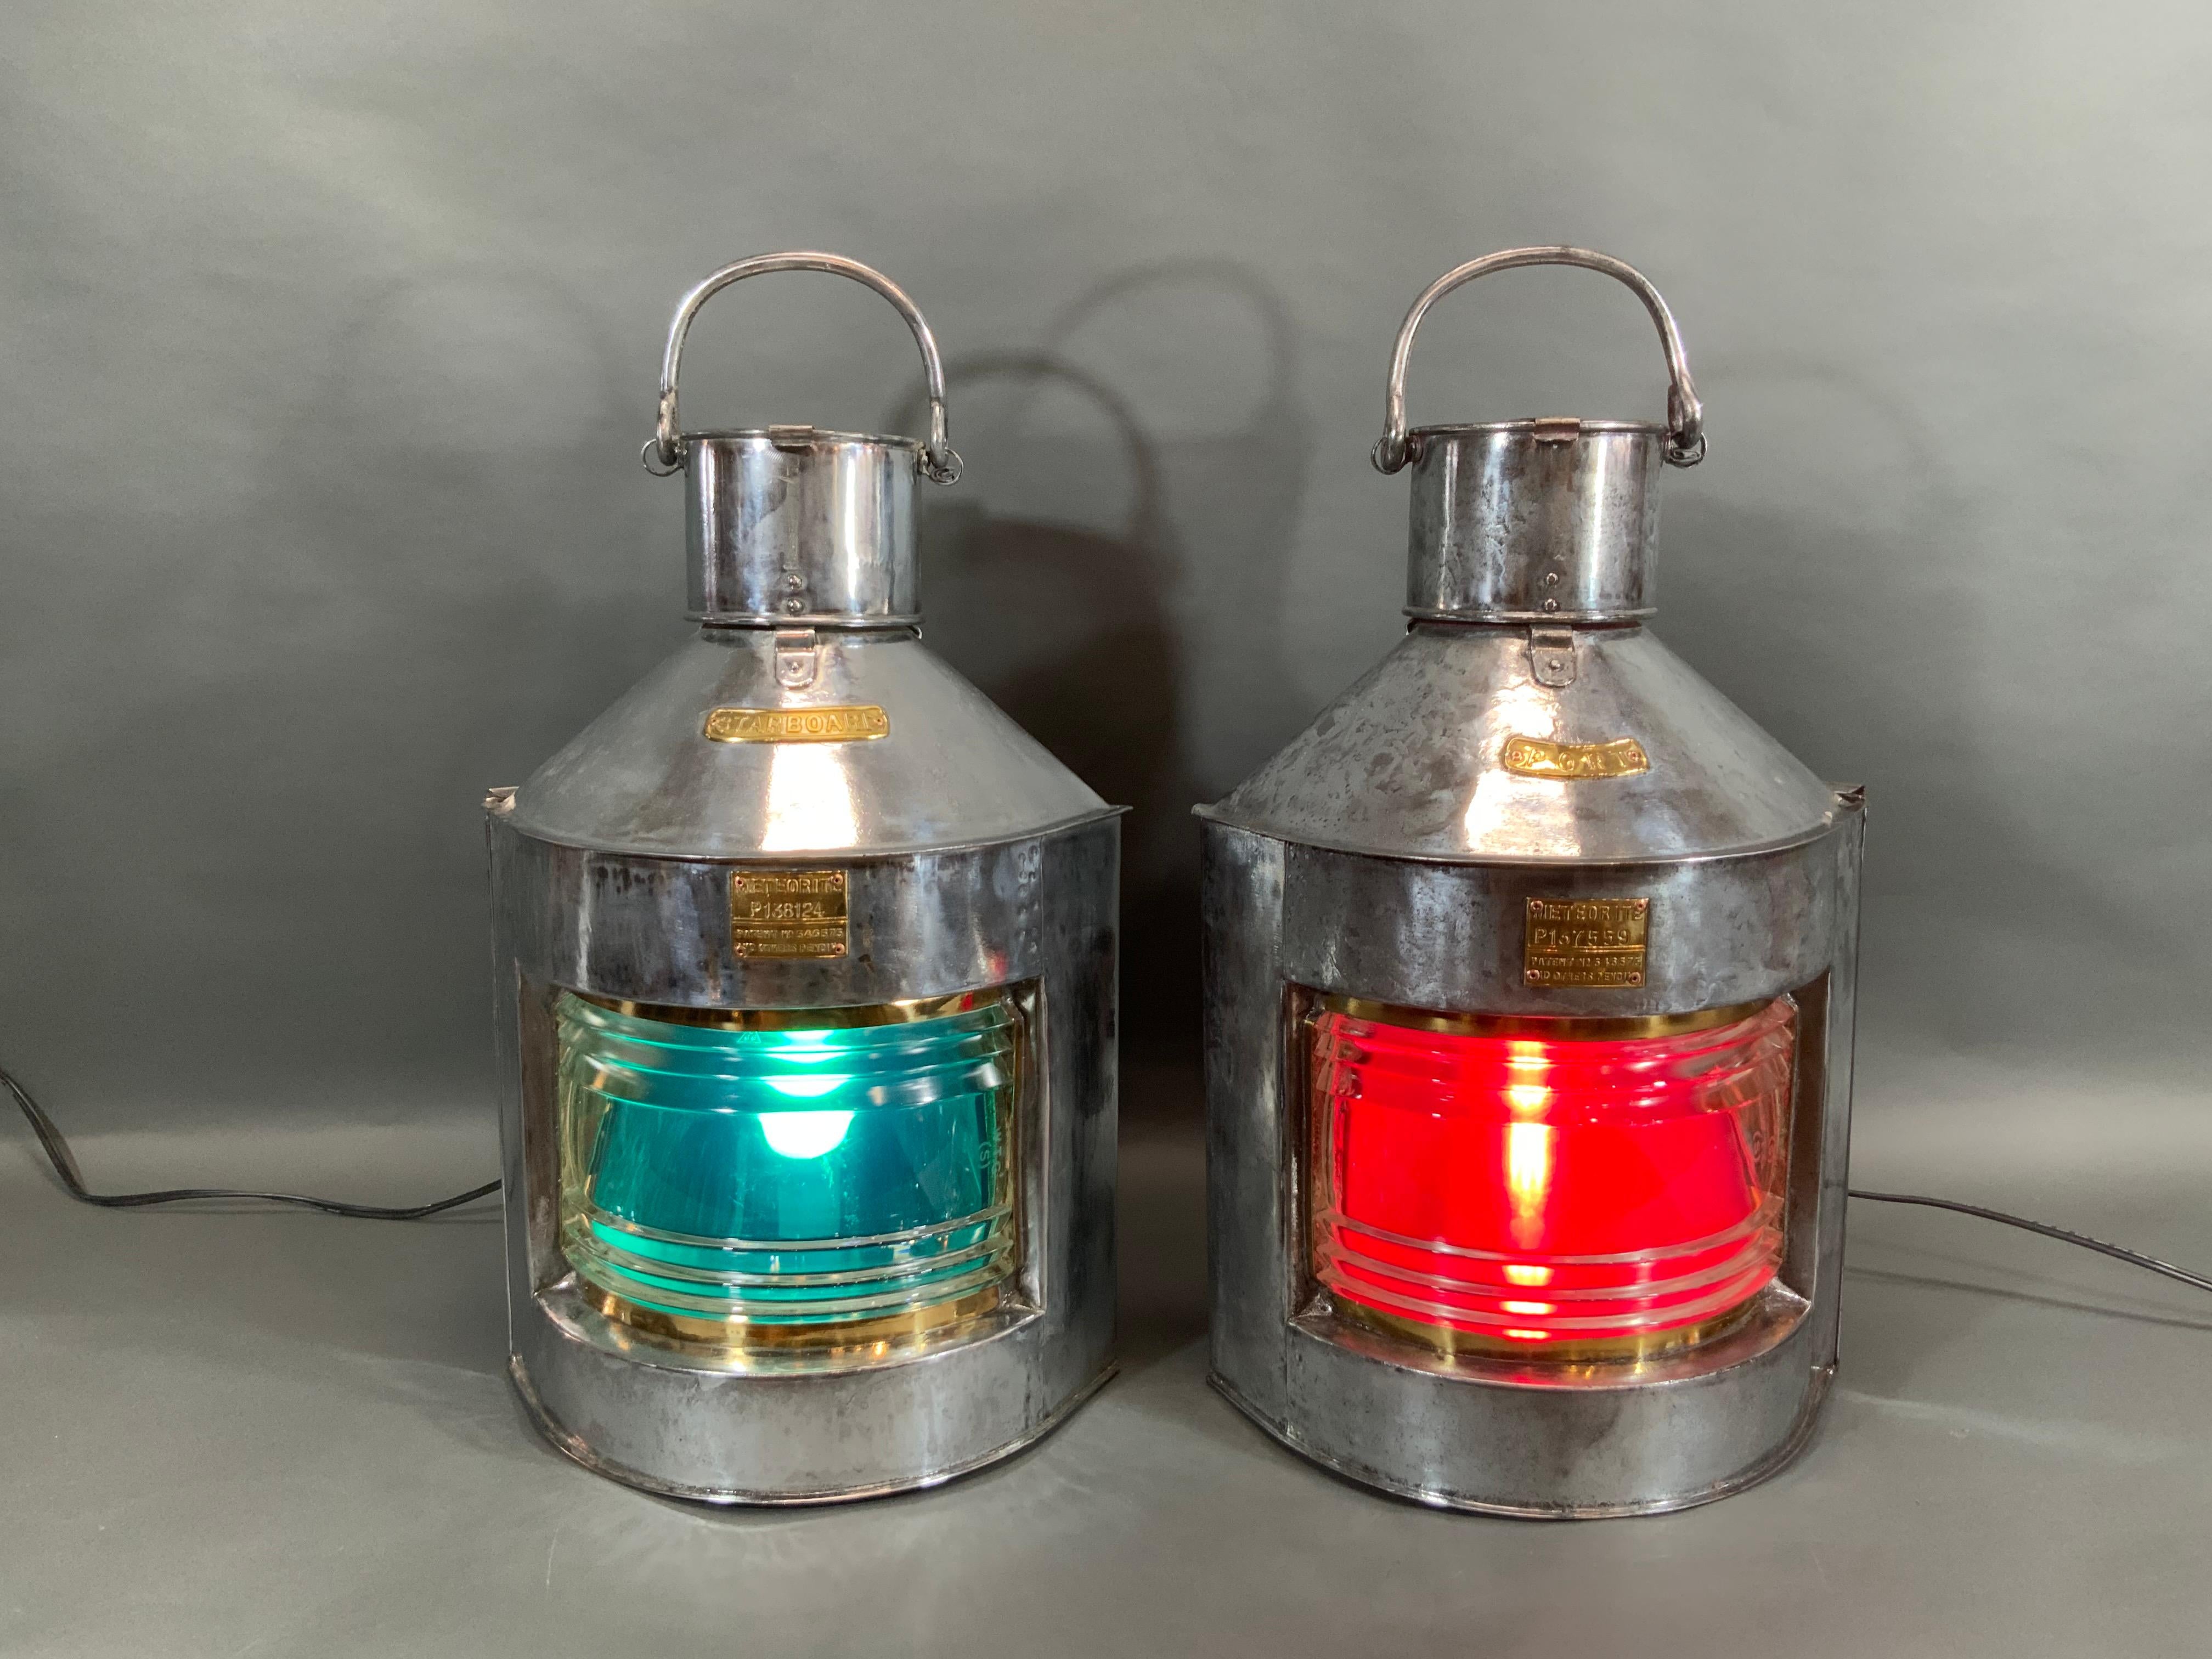 Ship's port and starboard lanterns with polished and lacquered steel cases, glass Fresnel lenses, red and green filters, electric sockets, etc.. With brass maker's badges and serial numbers from 